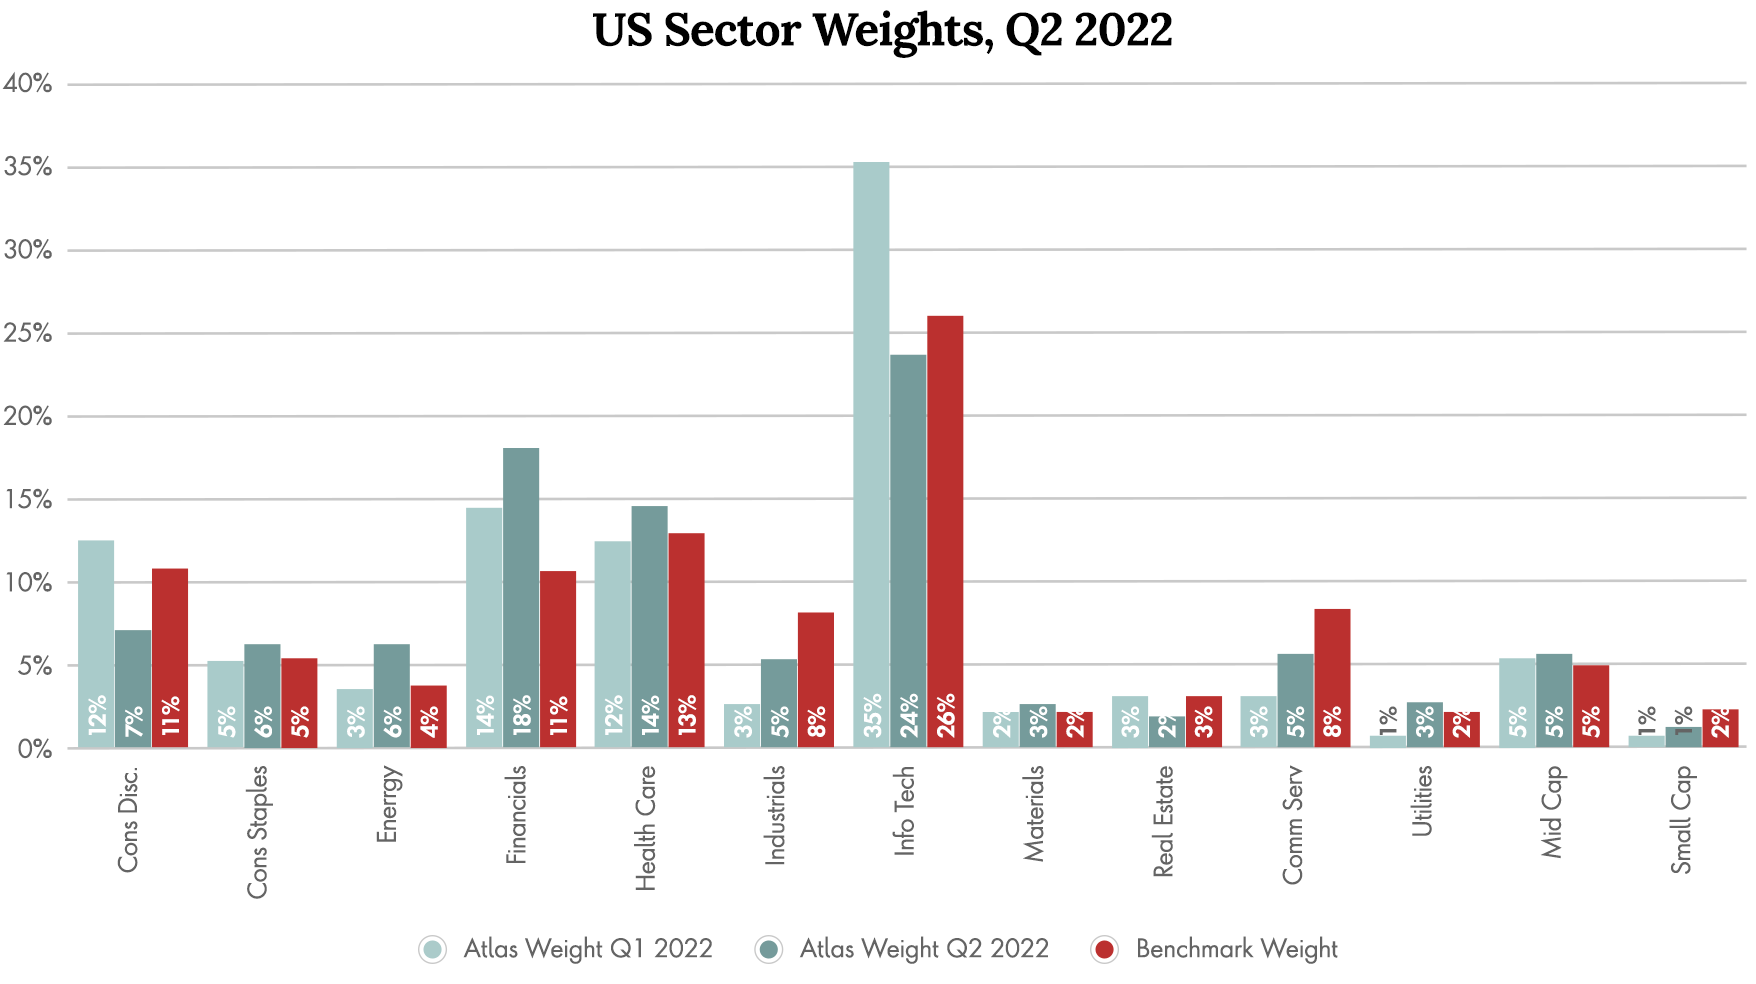 US Sector Weights, Q2 2022